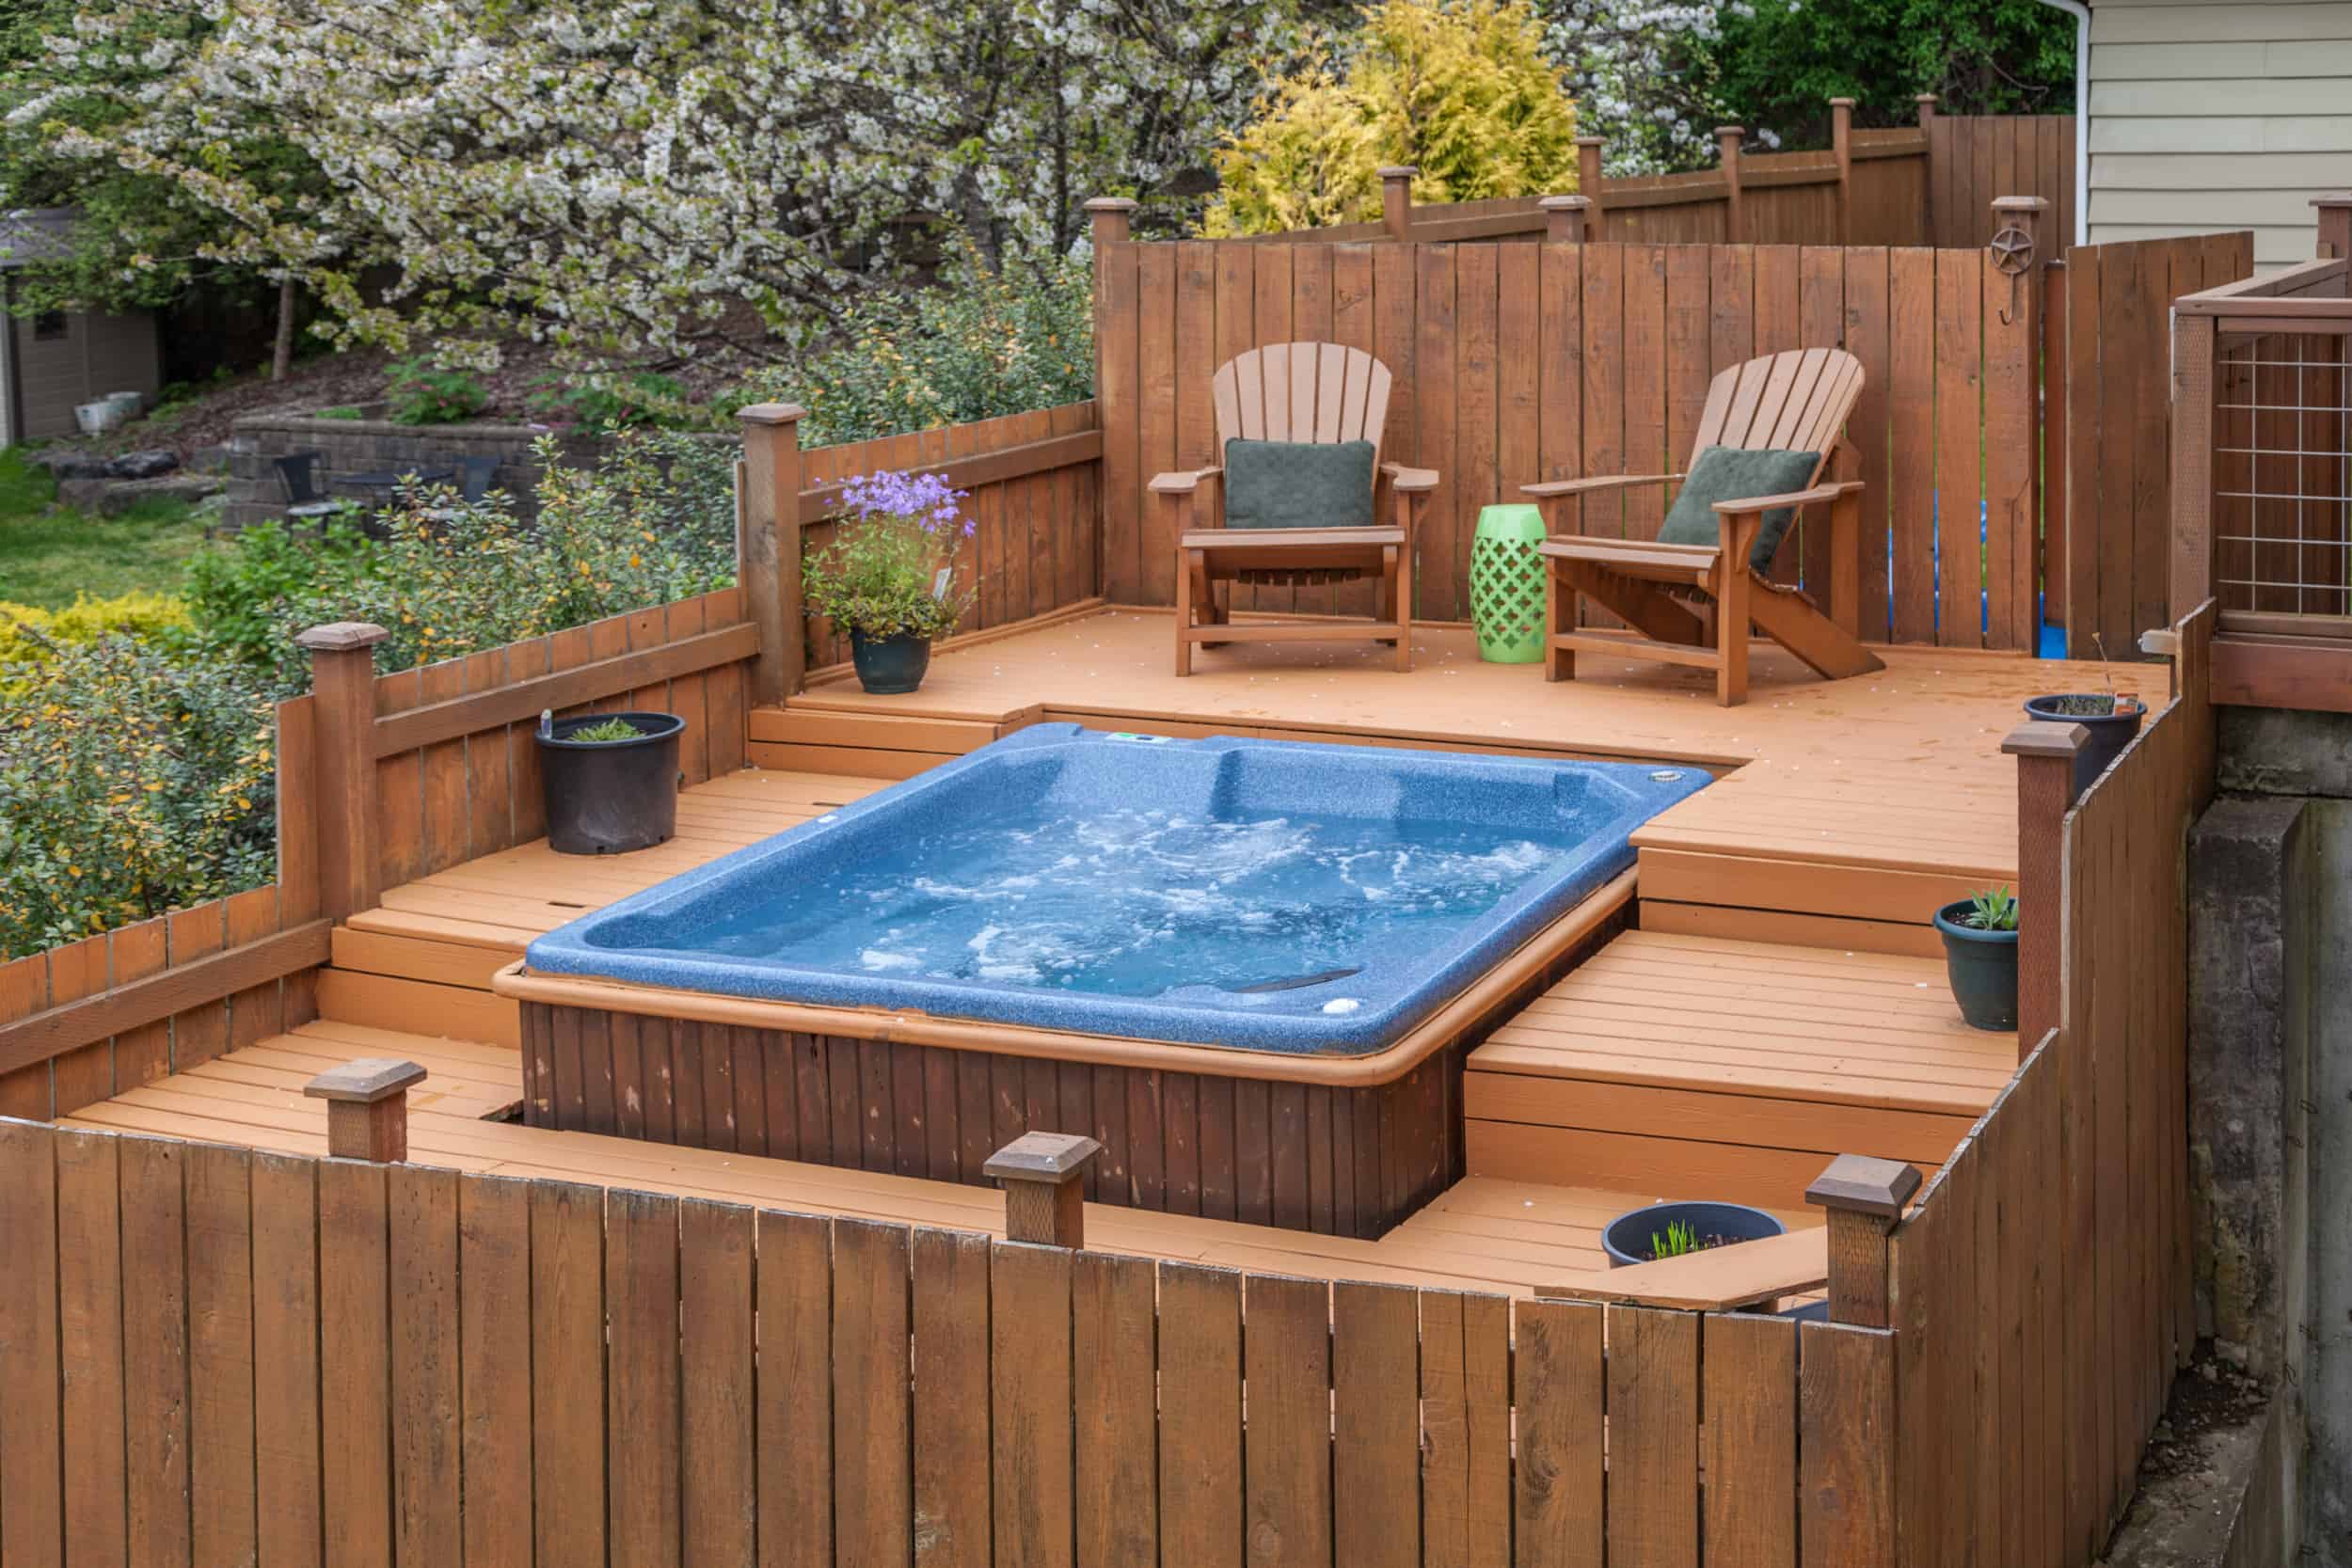 Can I Add A Hot Tub To My Deck Decks Docks Lumber Co,French Country Home Design